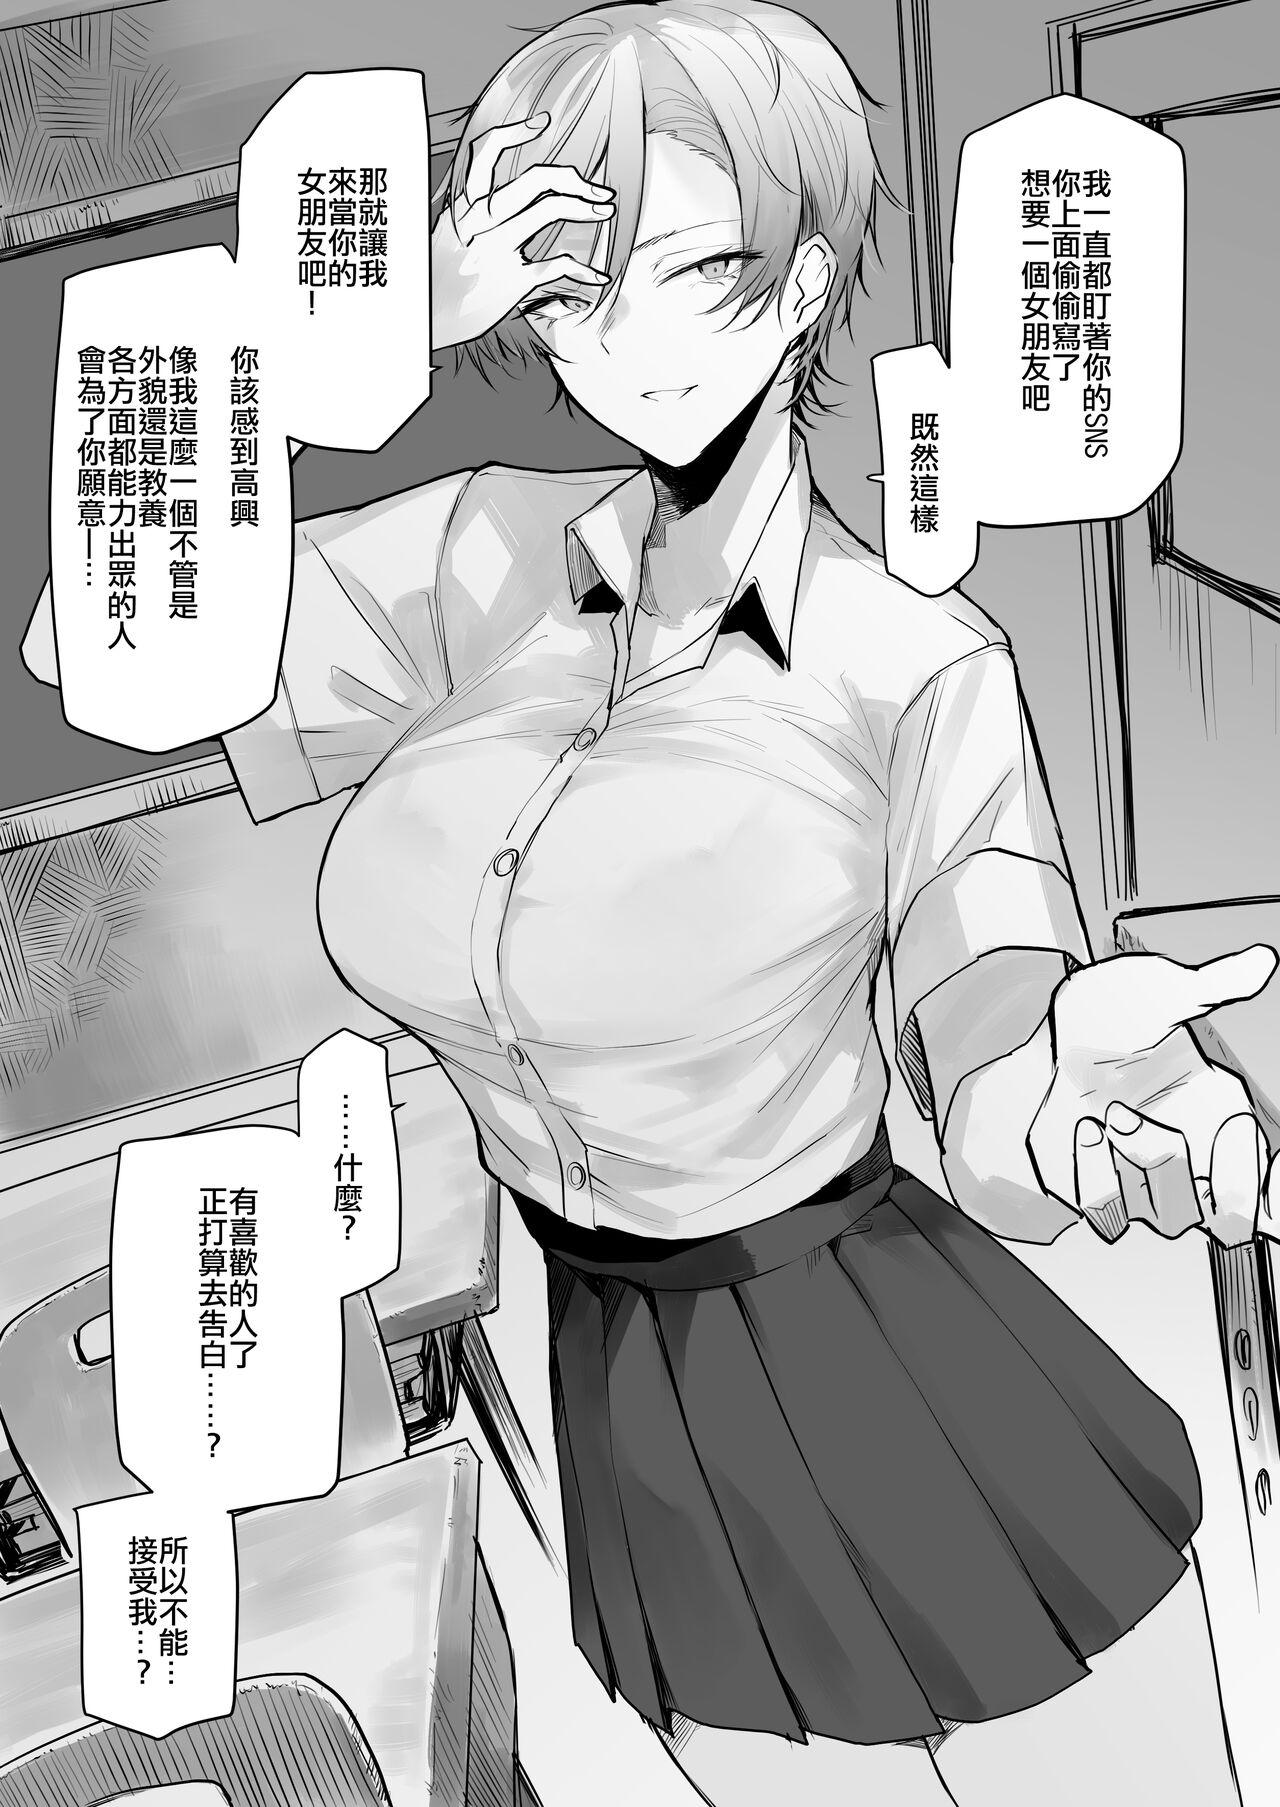 Tattoo A Manga About An Arrogant, Handsome Onee-San（Chinese） Free Blowjobs - Page 3